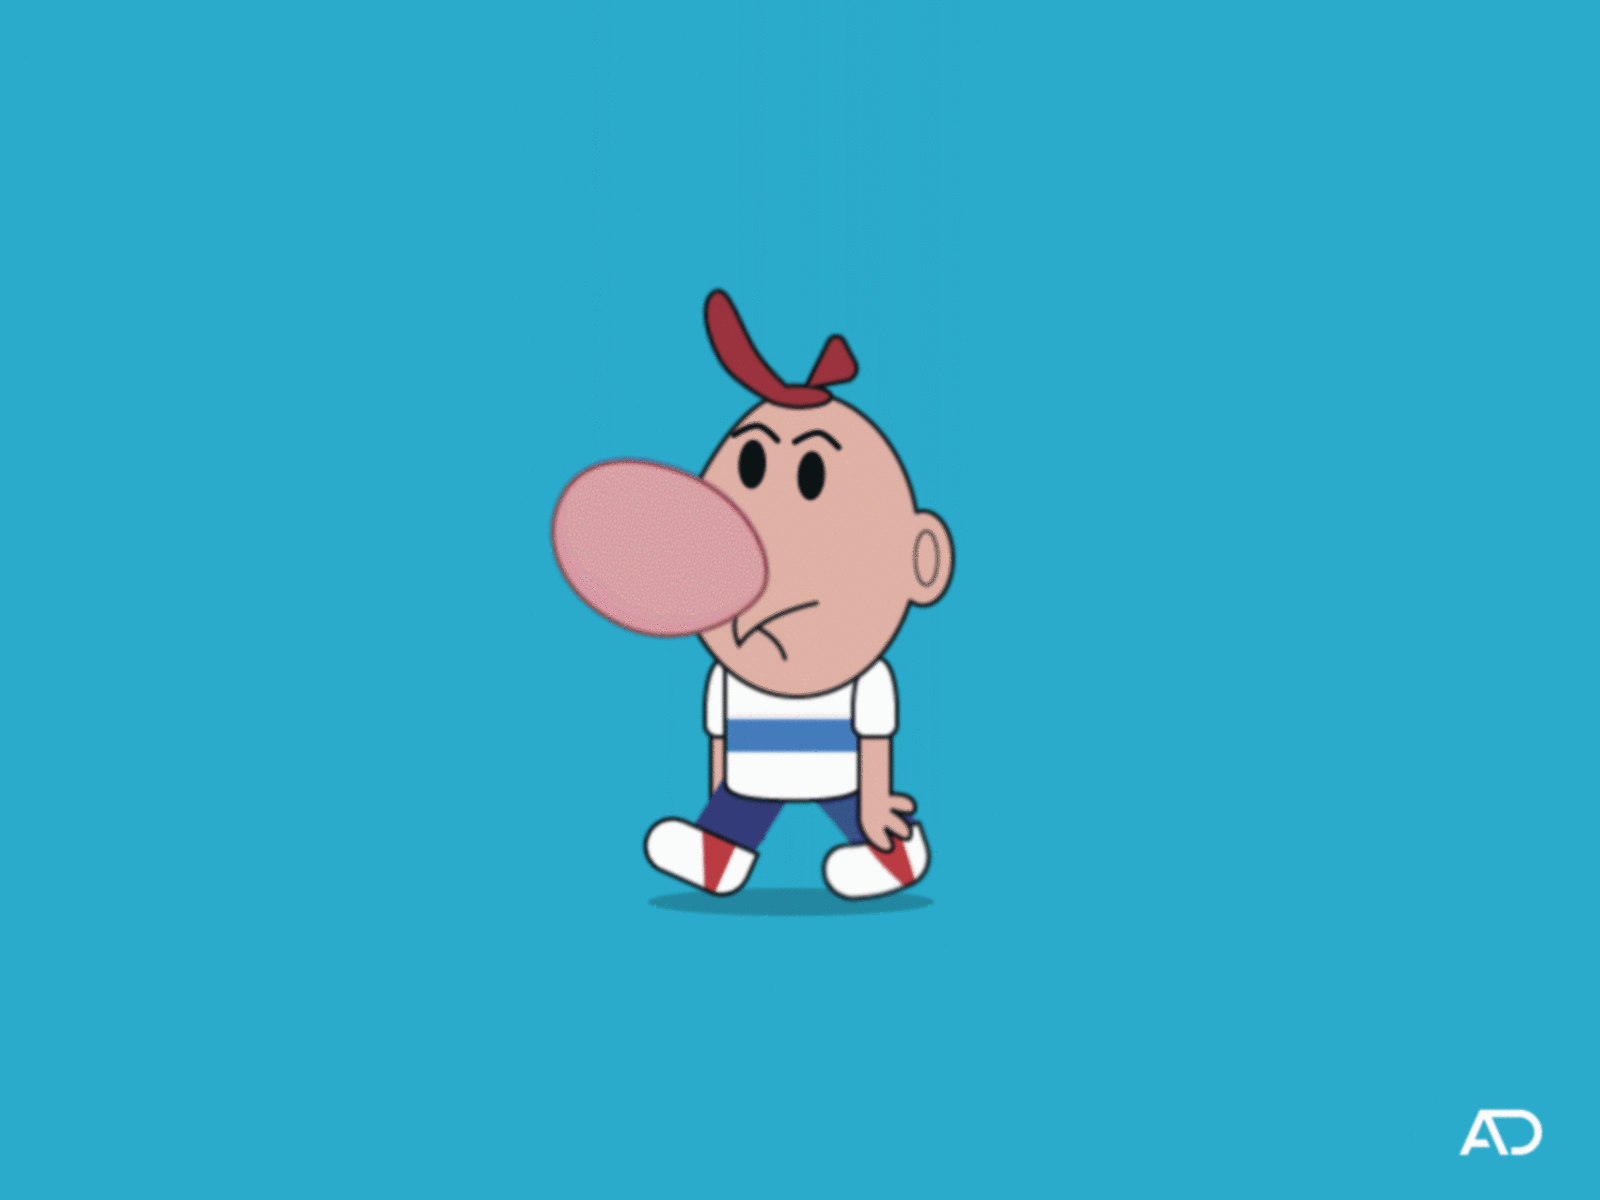 Billy by Lucyus on Dribbble